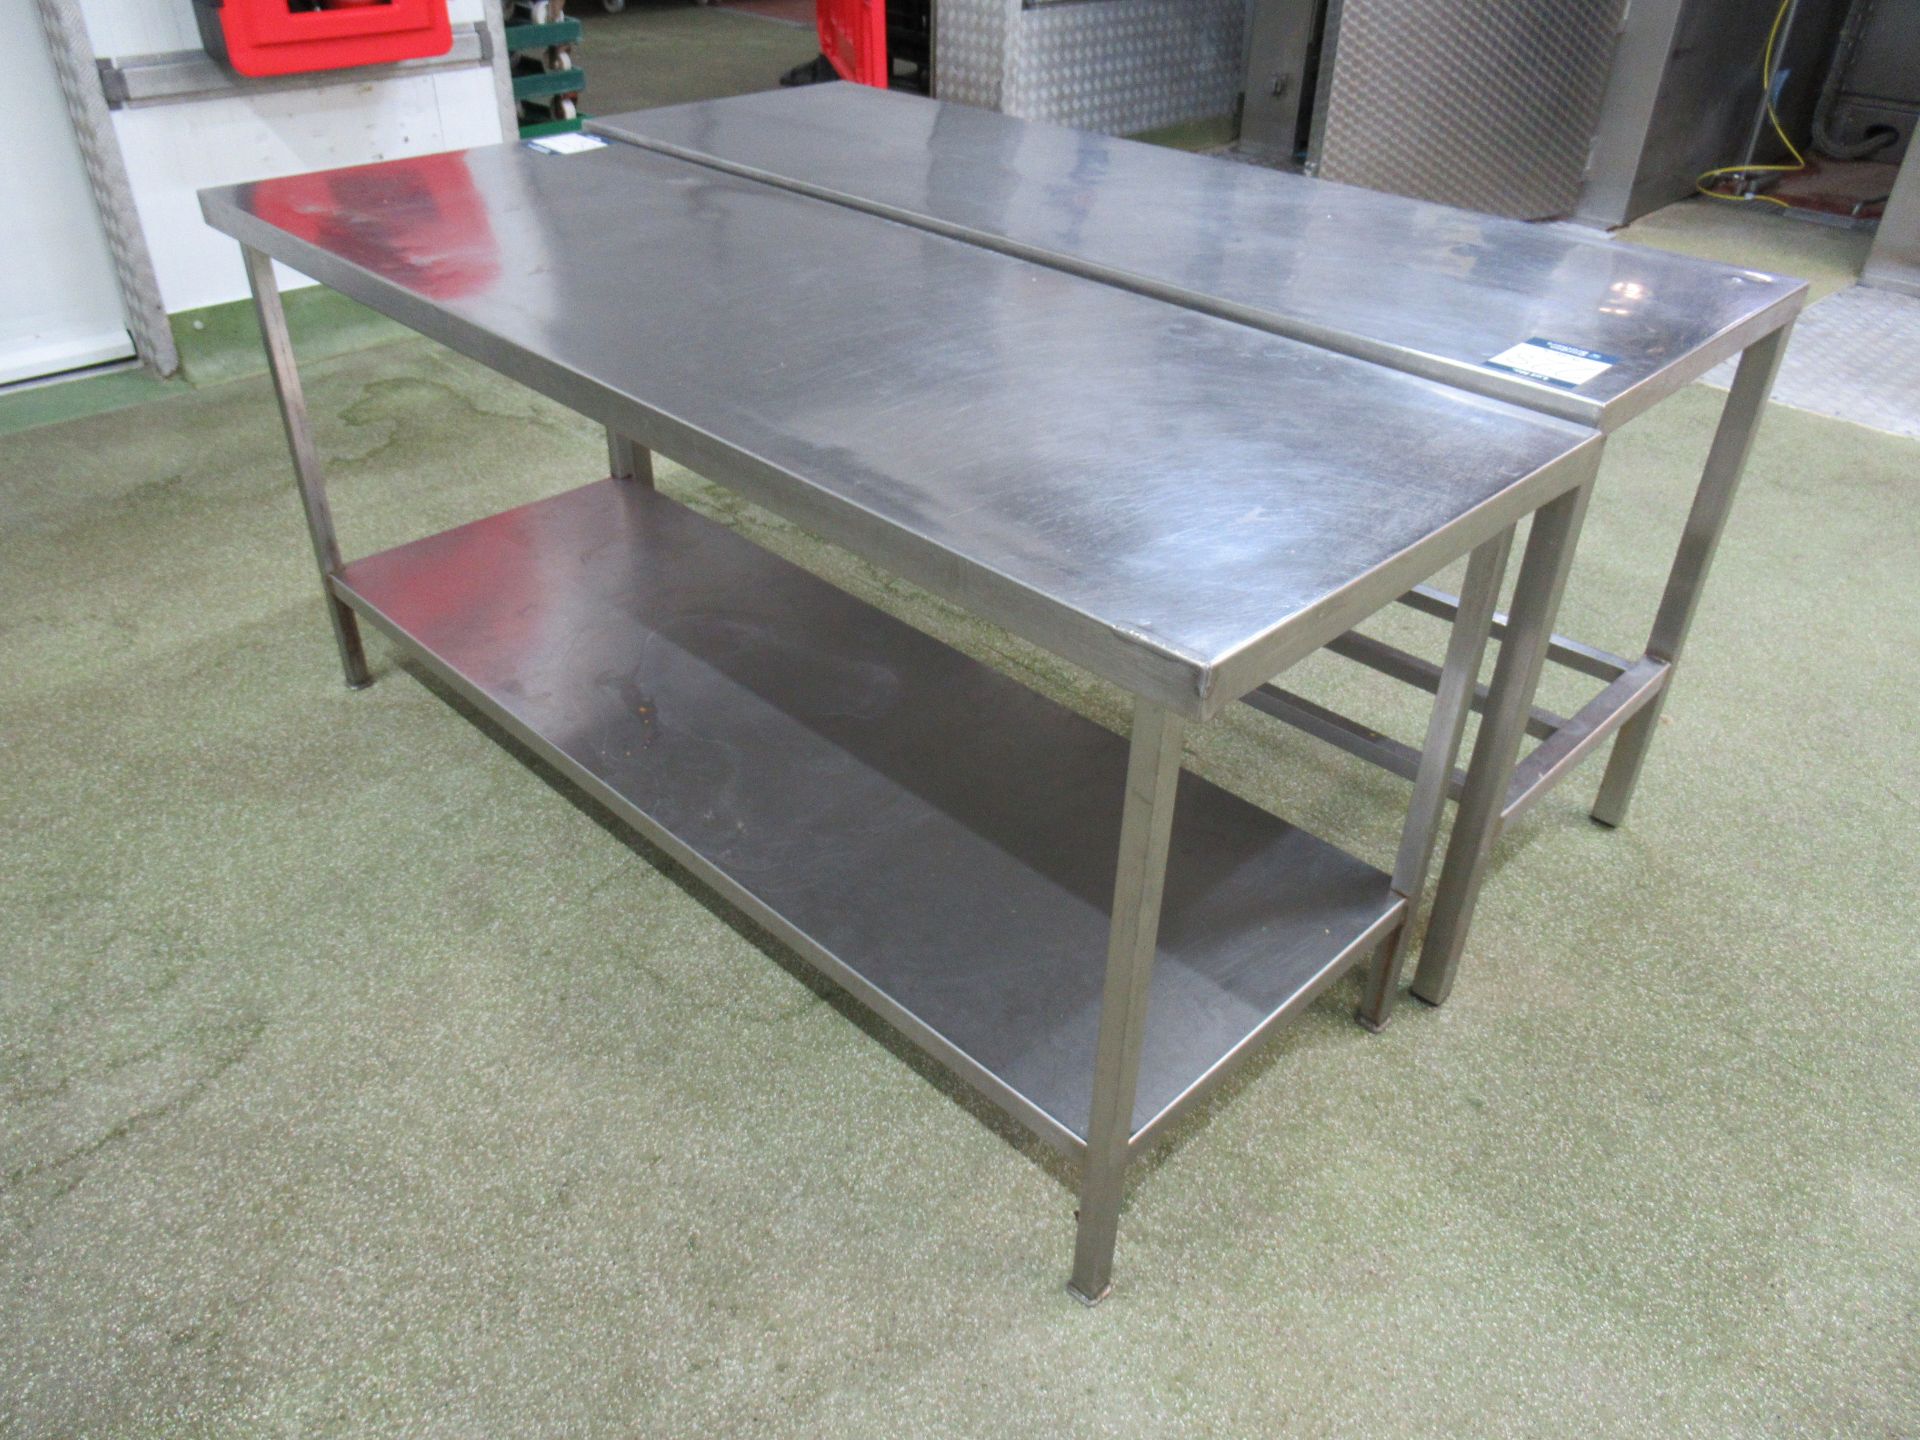 4 Stainless steel tables, one with 1800 x 600mm work surface and three with 1800 x 650mm work - Image 5 of 8